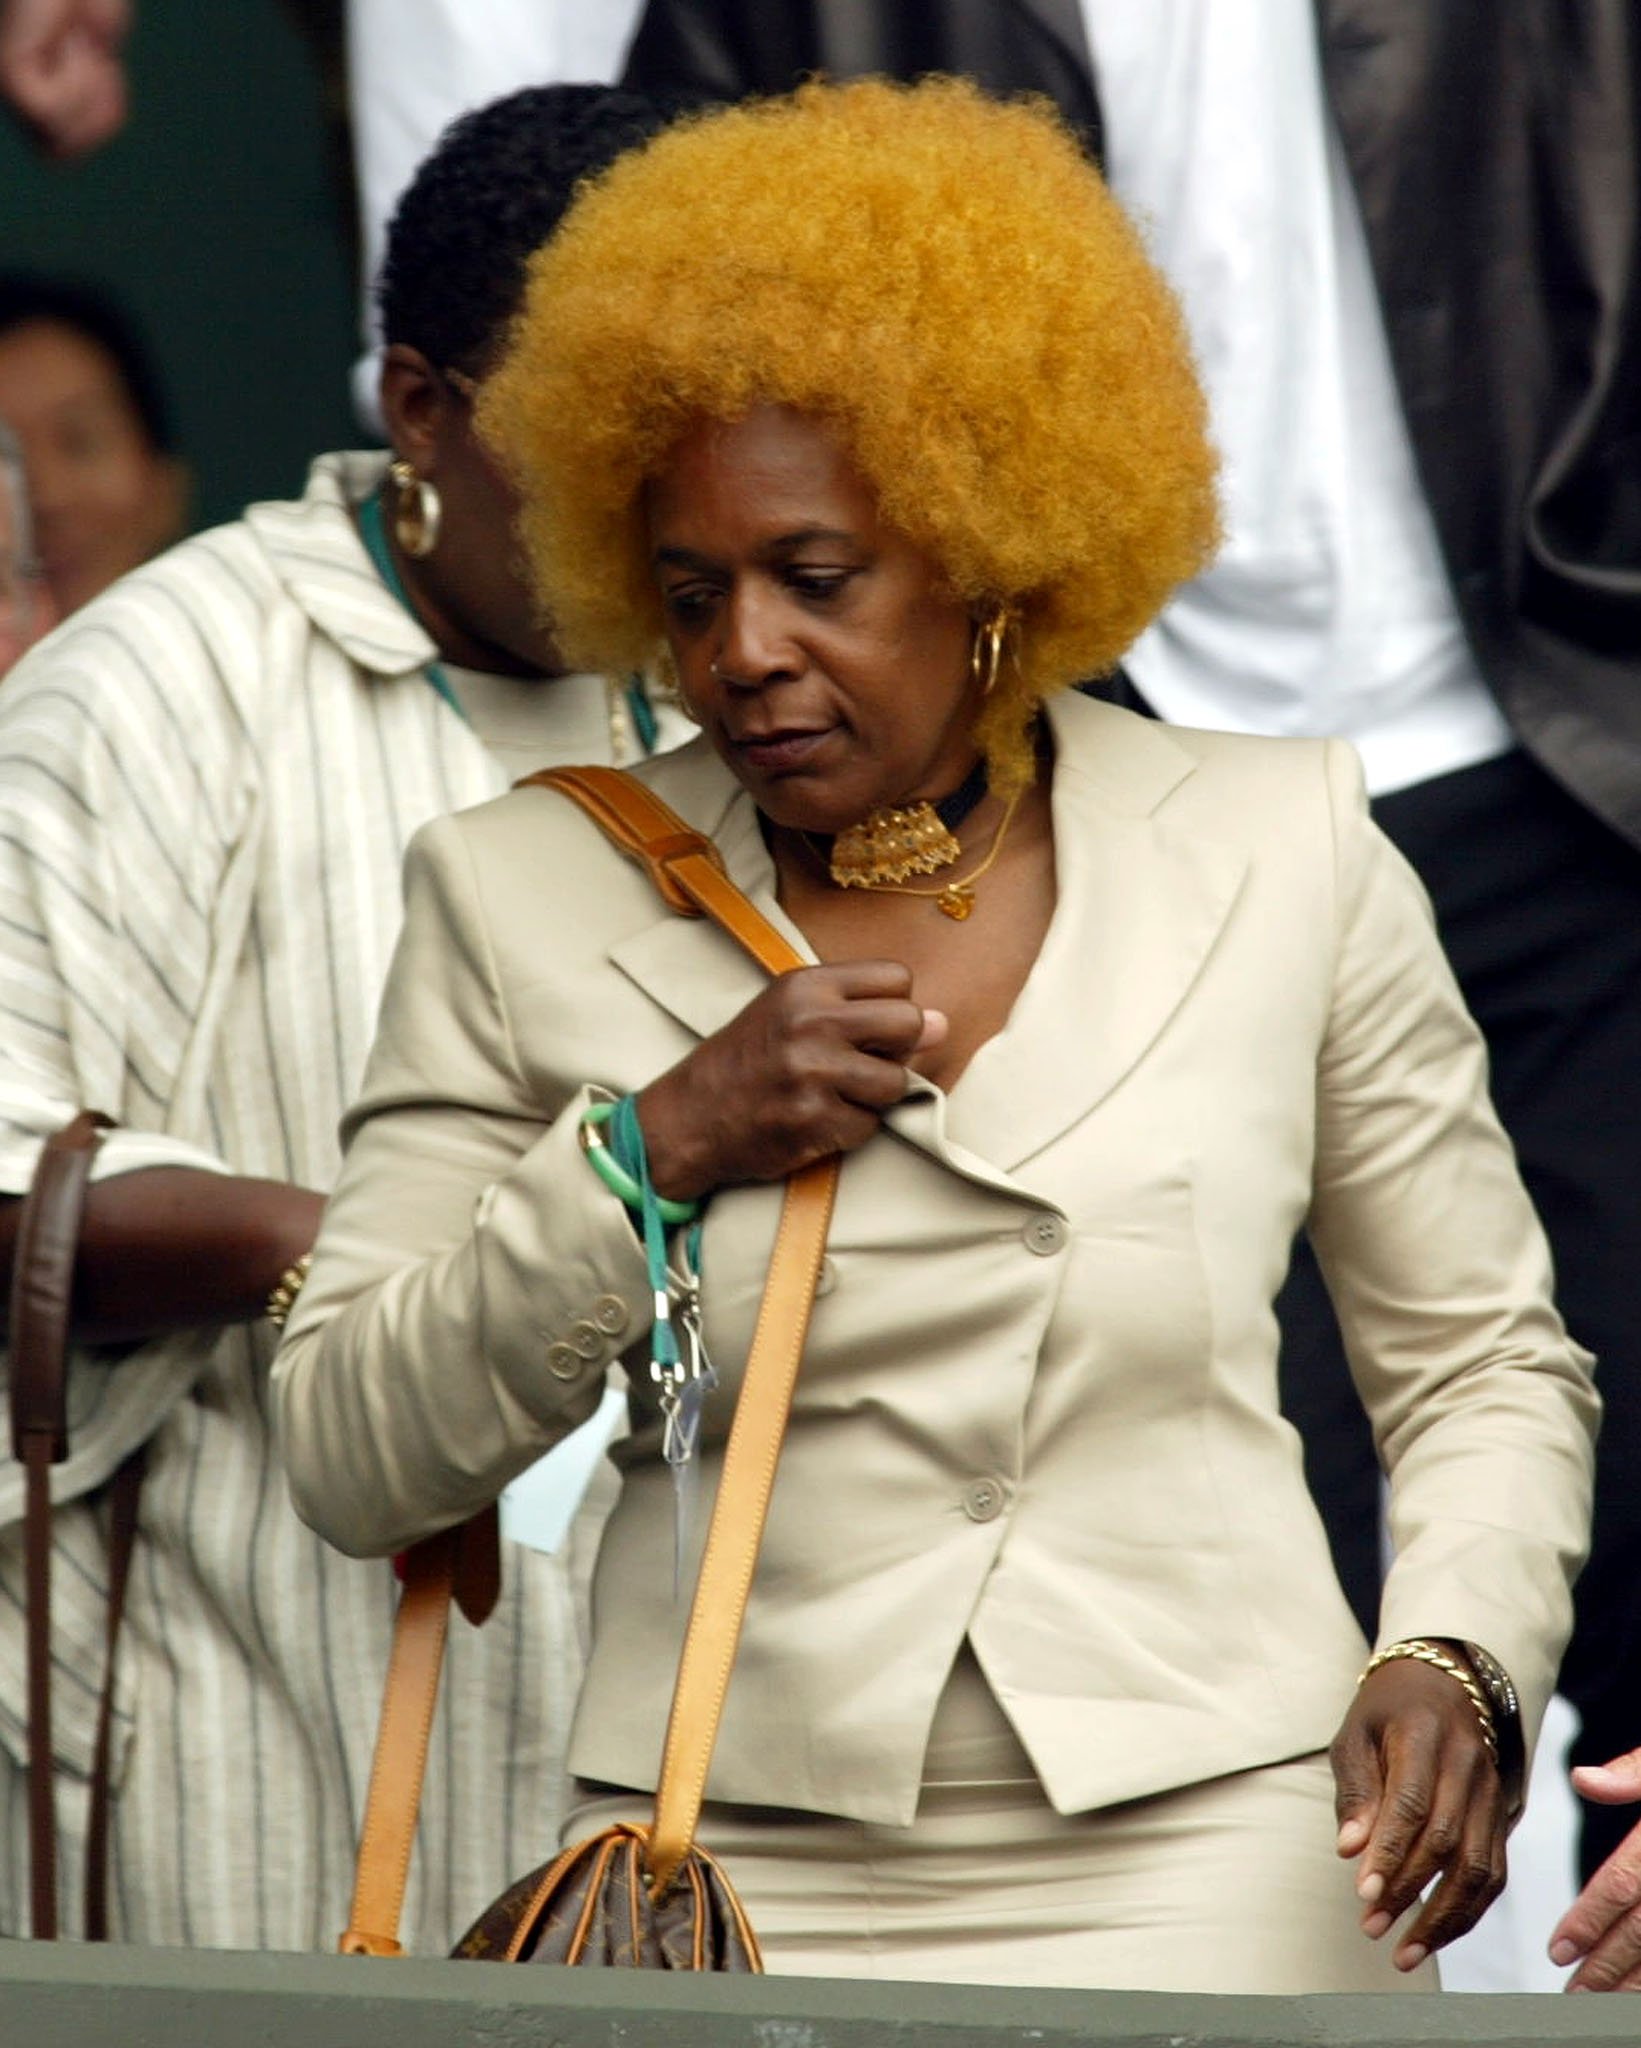  Oracene Williams arrives to her seat at Centre Court to watch her daughters US sister Serena and Venus Williams playing the Women's Final at the Wimbledon Tennis Championships, 06 July 2002. | Source: Getty Images